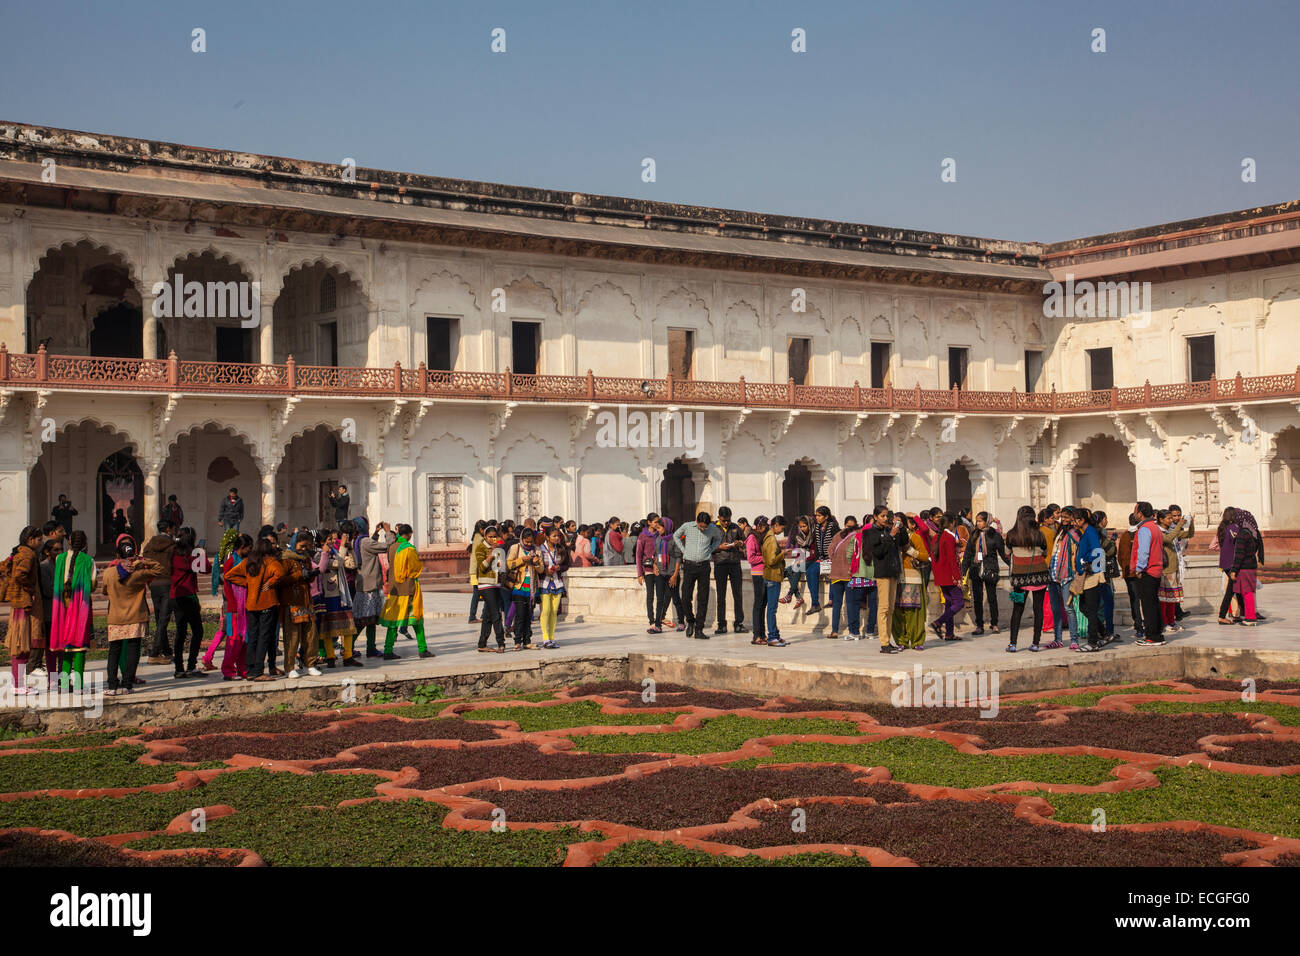 Gardens inside the Agra Fort, India Stock Photo